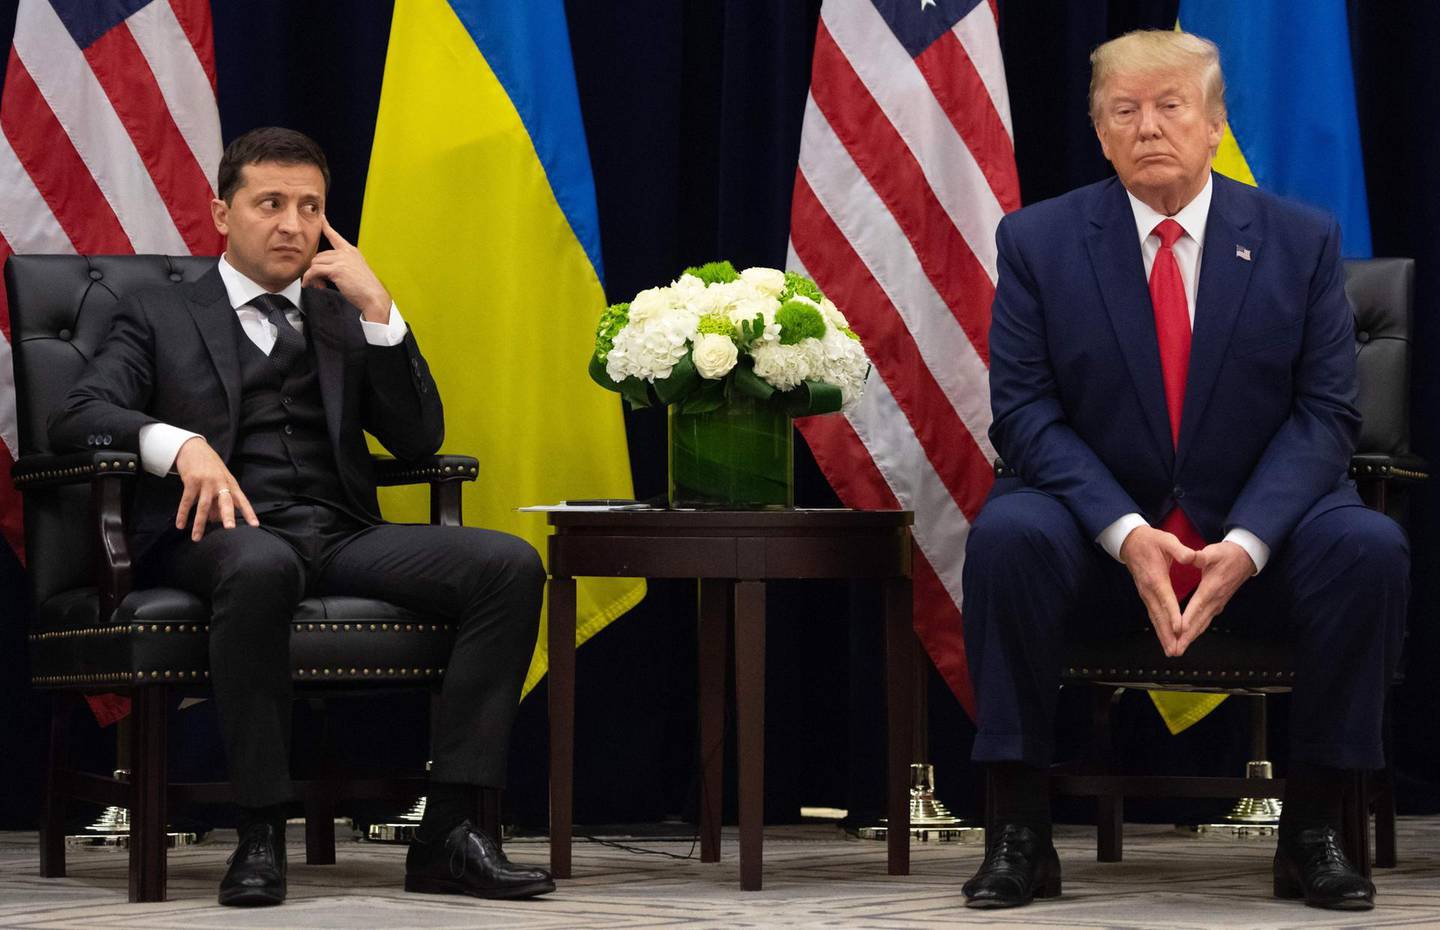 - AFP PICTURES OF THE YEAR 2019 - 

US President Donald Trump and Ukrainian President Volodymyr Zelensky looks on during a meeting in New York on September 25, 2019, on the sidelines of the United Nations General Assembly.  / AFP / SAUL LOEB
